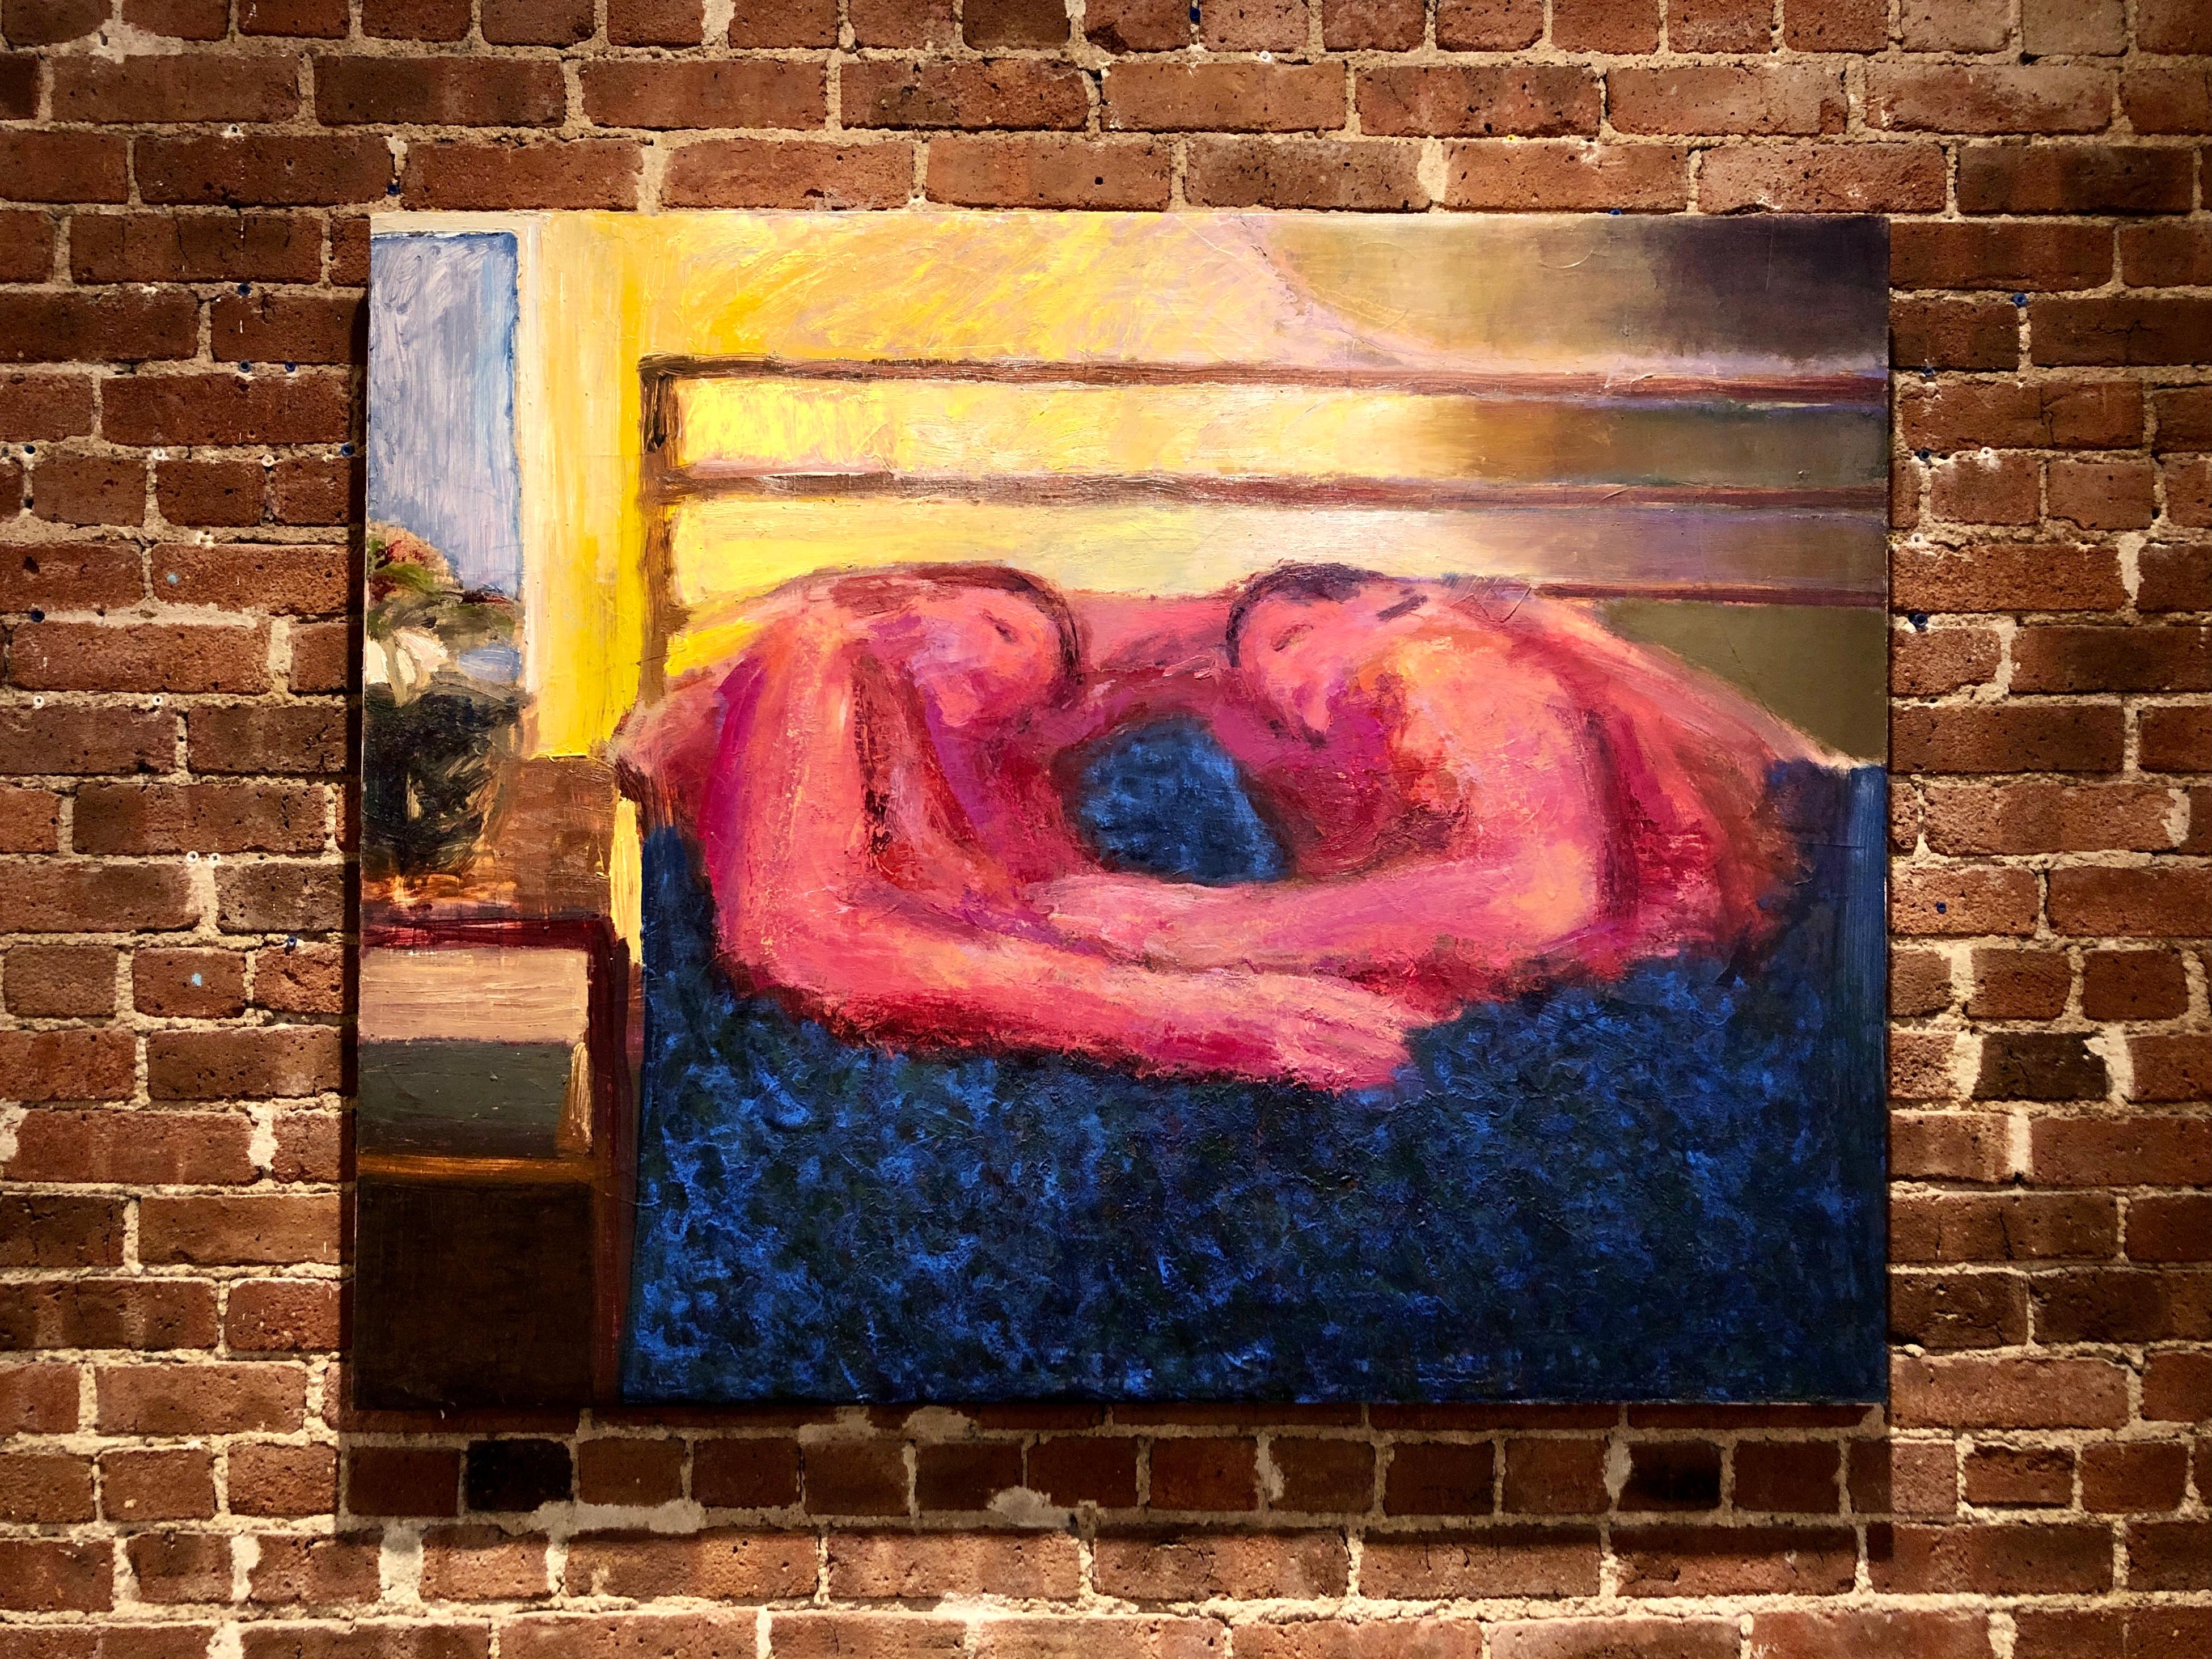 Nosotros, figurative oil painting of two people embracing in bed, red and blue - Painting by Francisco Rocha Salazar